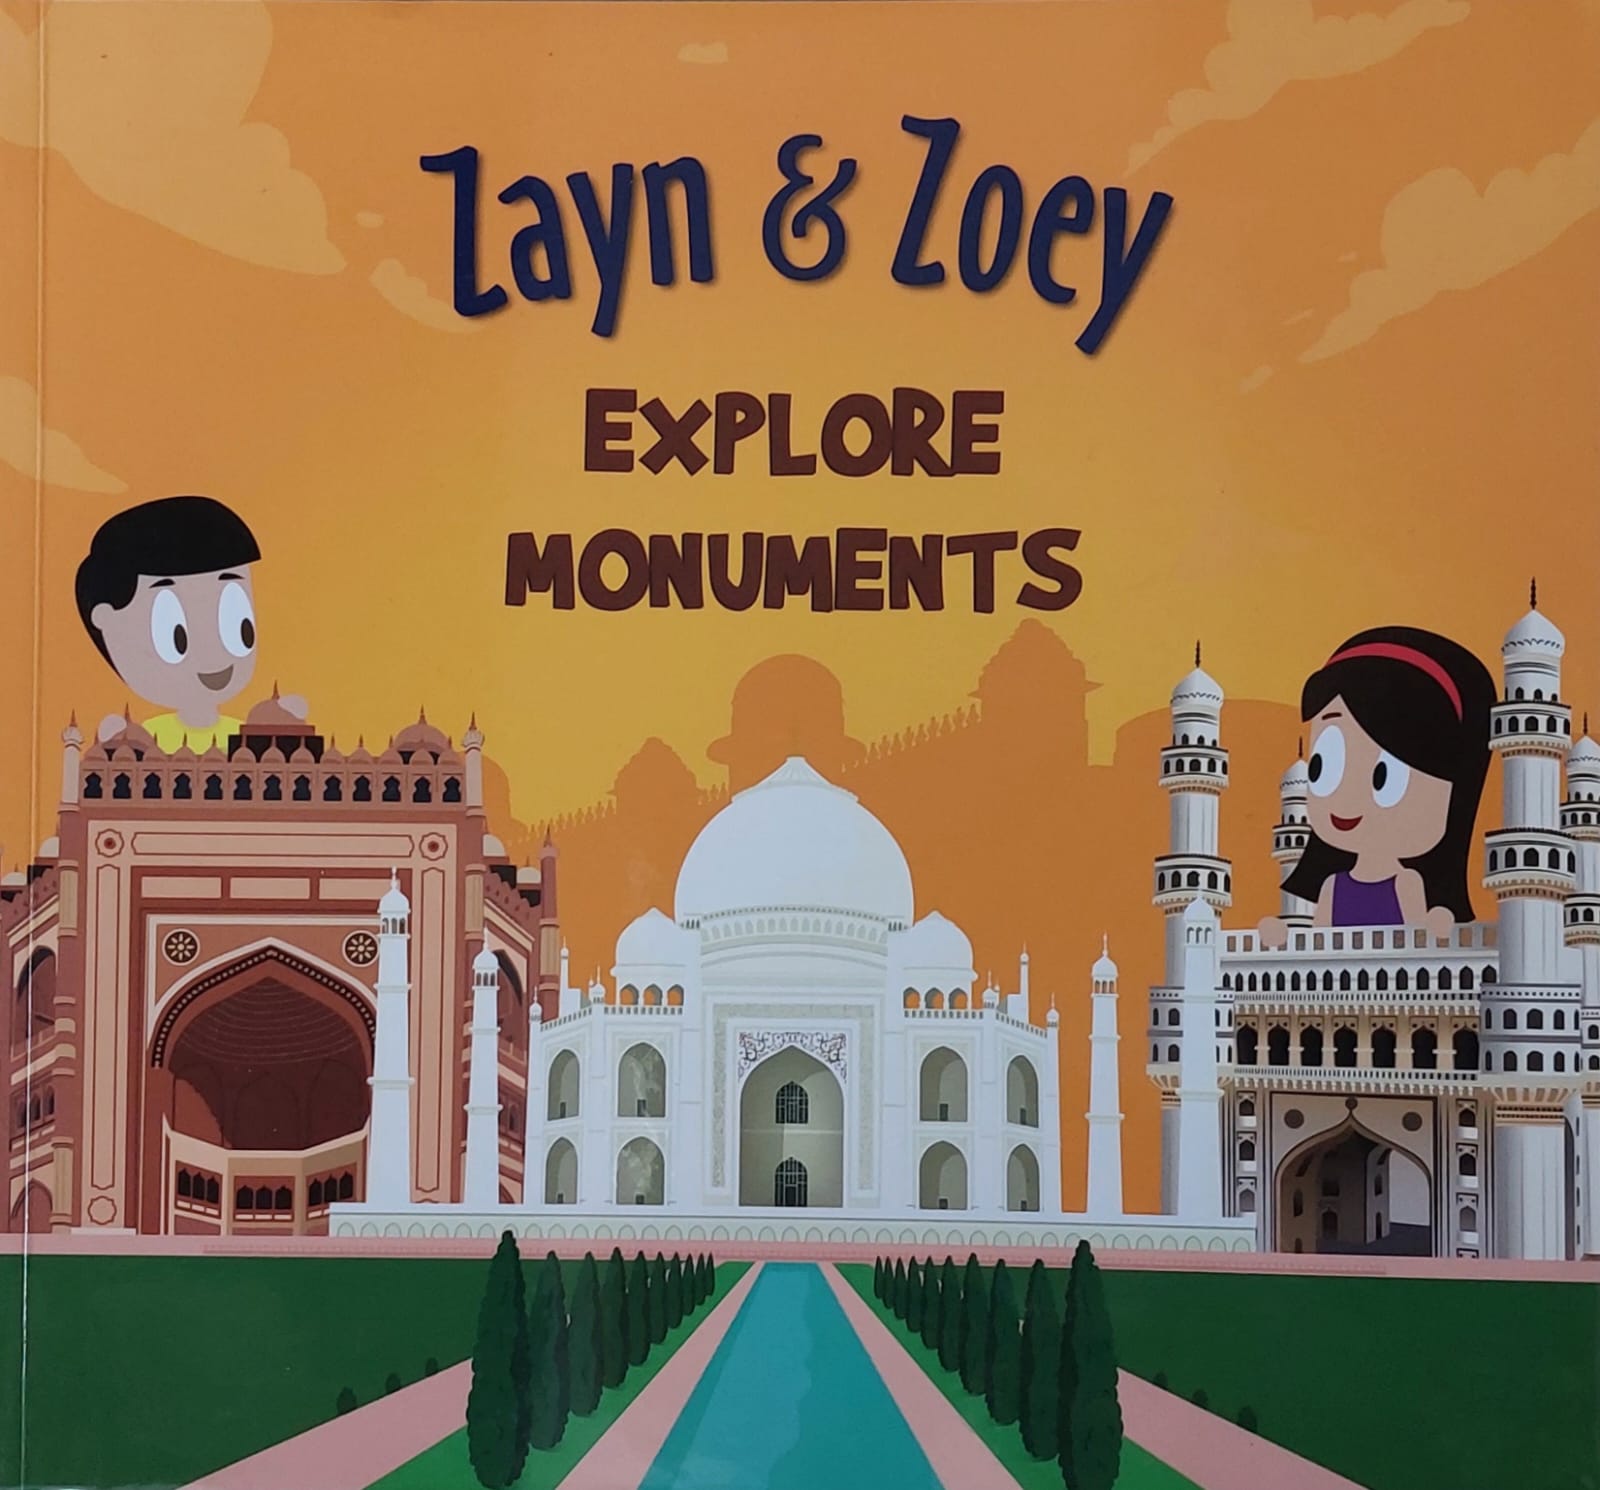 IMG : Zayn and Zoey Stories of India Vol 2 Explore Monuments